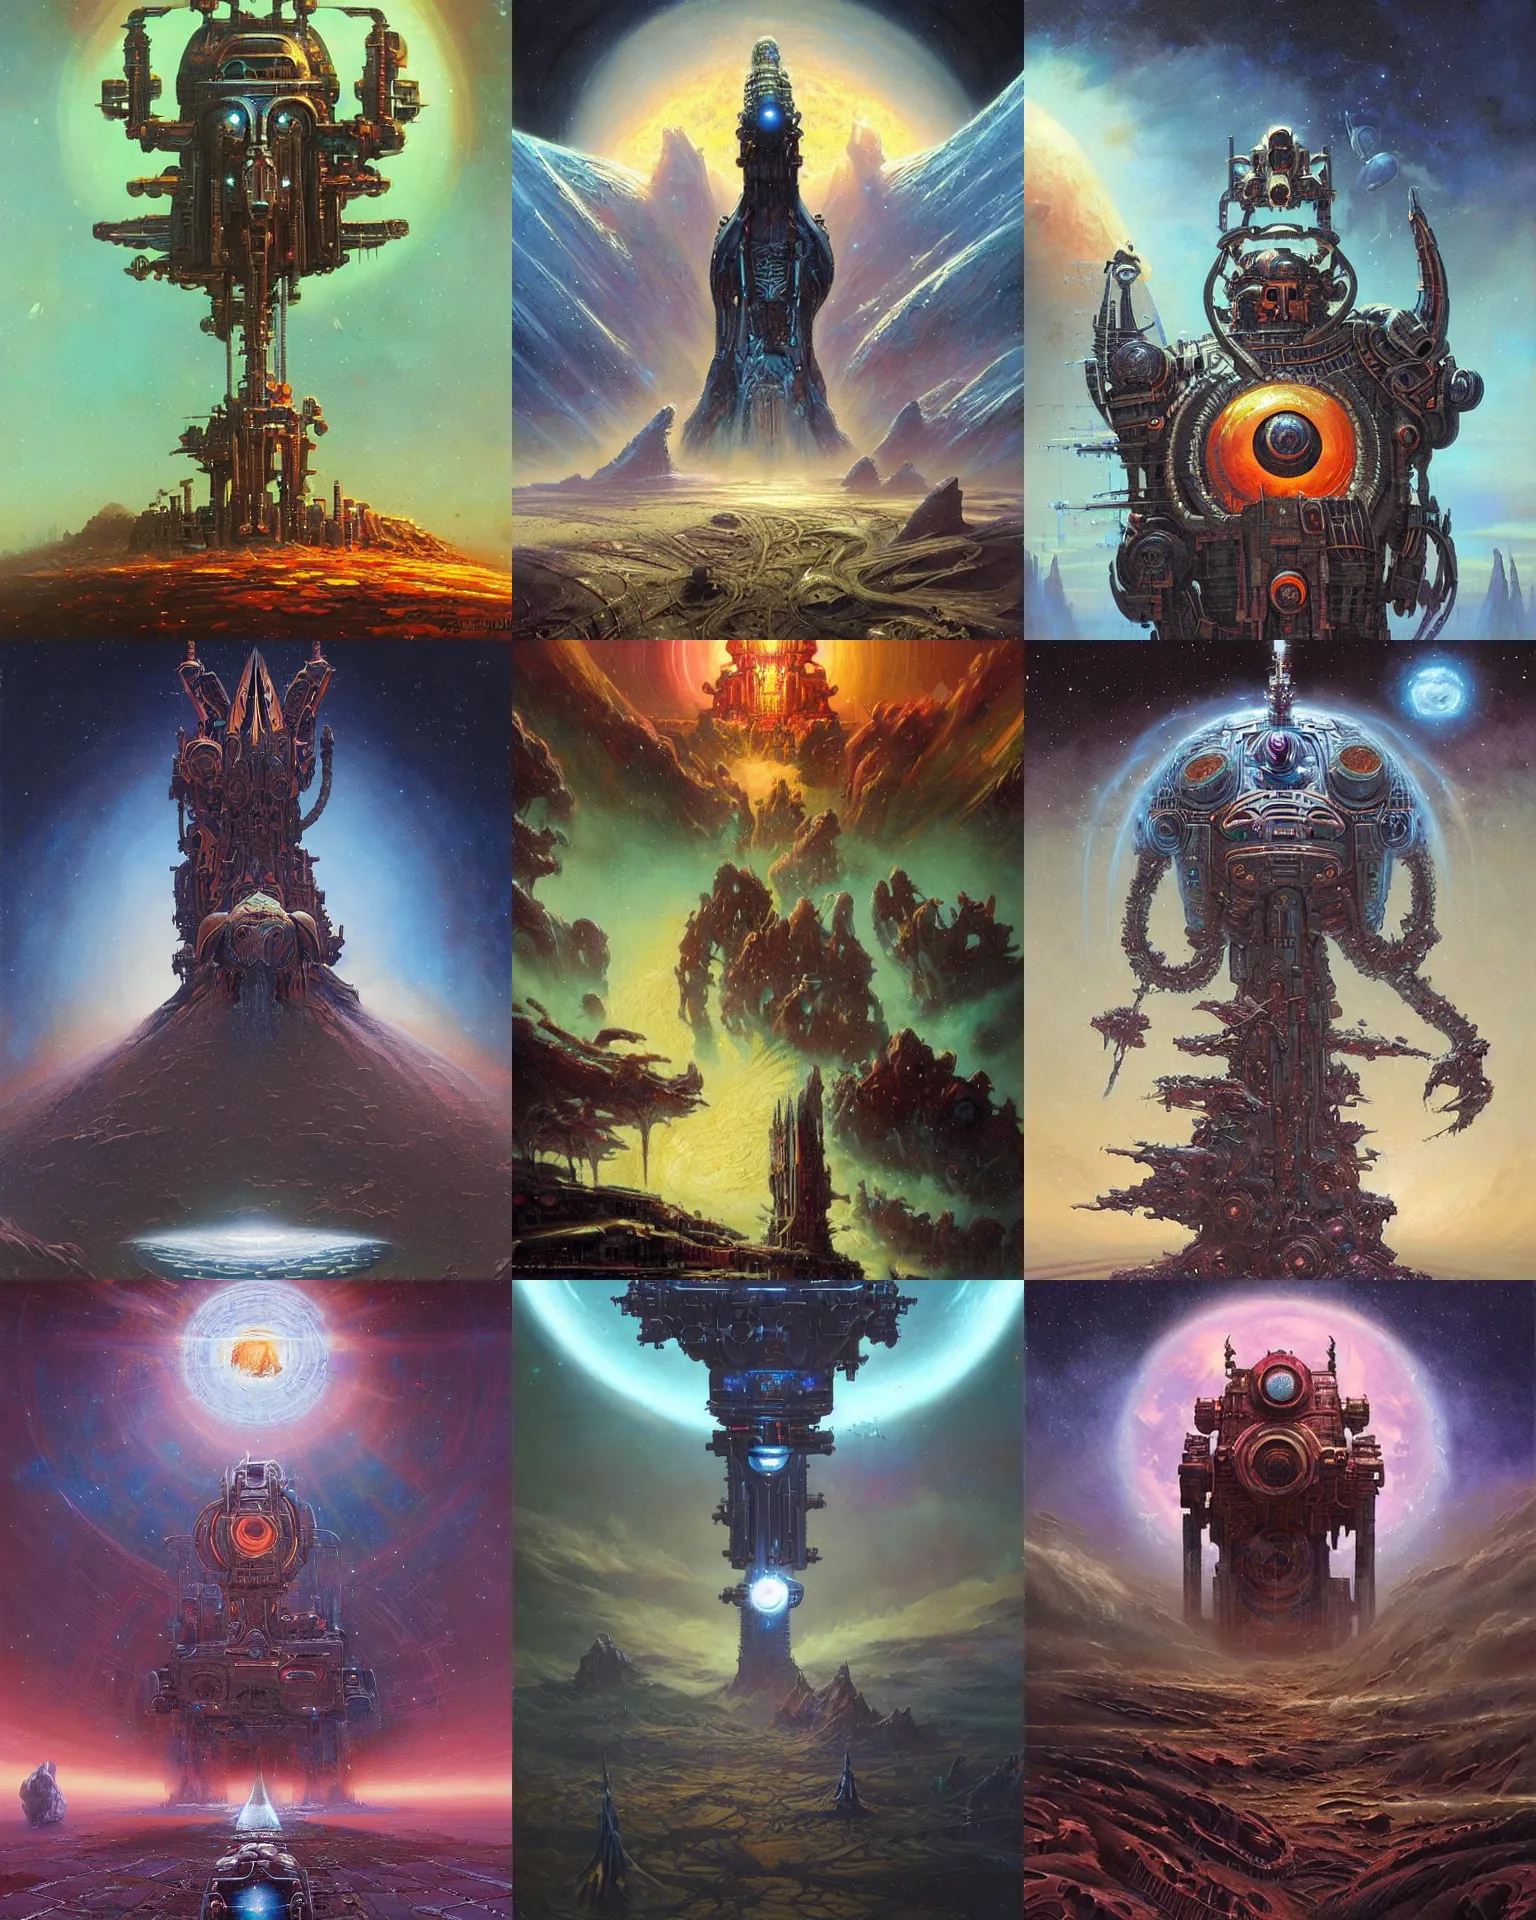 Prompt: beautiful oil painting, beautiful oil painting, beautiful oil painting, amazing unique dark sci-fi retro cover art of the great cosmic god machine by James Gurney and Greg Rutkowski and Tyler Edlin, amazing unique dark sci-fi retro cover art of the great cosmic god machine by James Gurney and Greg Rutkowski and Tyler Edlin, composition and color palette by Simon Stalenhag, composition and color palette by Simon Stalenhag, composition and color palette by Simon Stalenhag, composition and color palette by Simon Stalenhag, sci-fi inspiration from Jim Burns and Bruce Pennington, sci-fi inspiration from Jim Burns and Bruce Pennington, behold the great universe machine, atmospheric lighting, epic scale, dynamic angle, cinematic composition, sense of awe, wonder, anthropomorphic machine, anthropomorphic machine, luminous black hole portal into time and space, luminous black hole portal into time and space, intricate details, sense of perspective, artificial intelligence gods, artificial intelligence gods, destination at the end of a journey, fantasy elements, surrealism, award winning, genius, atmospheric, monumental, iconic, trending on art station, award winning, genius, atmospheric, monumental, iconic, trending on art station